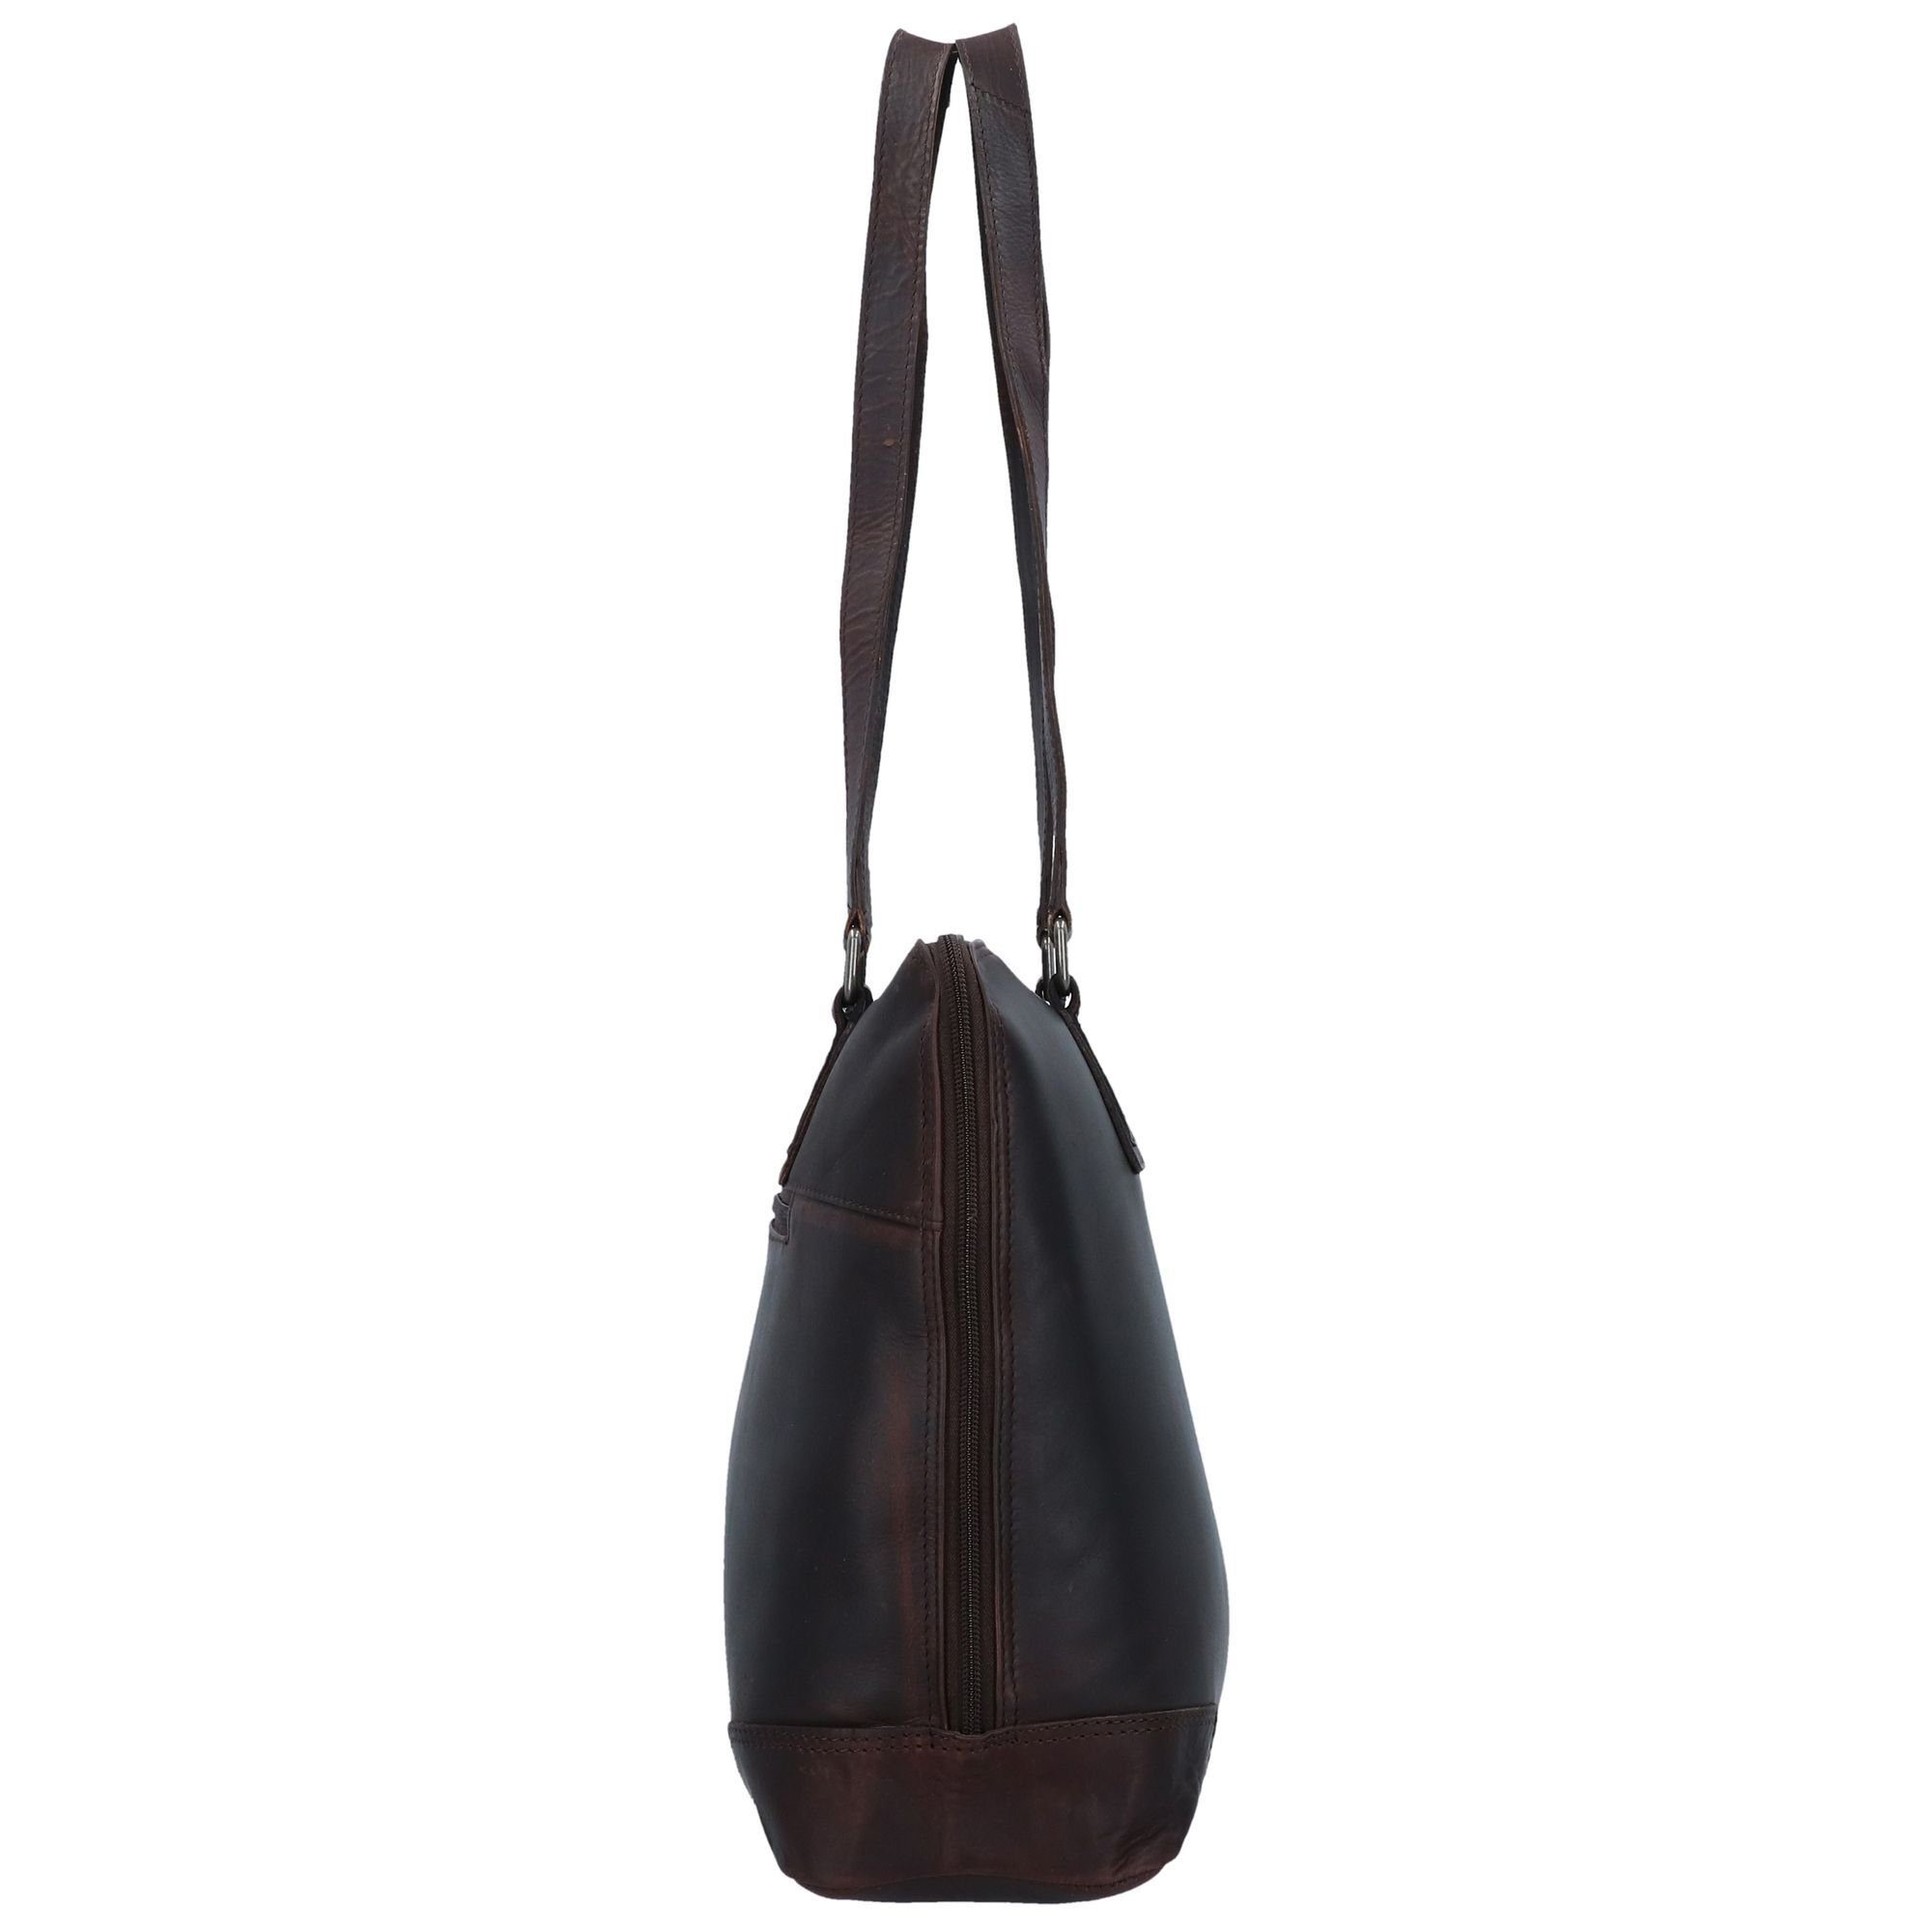 Chesterfield Brand The brown Schultertasche Wax Leder Up, Pull